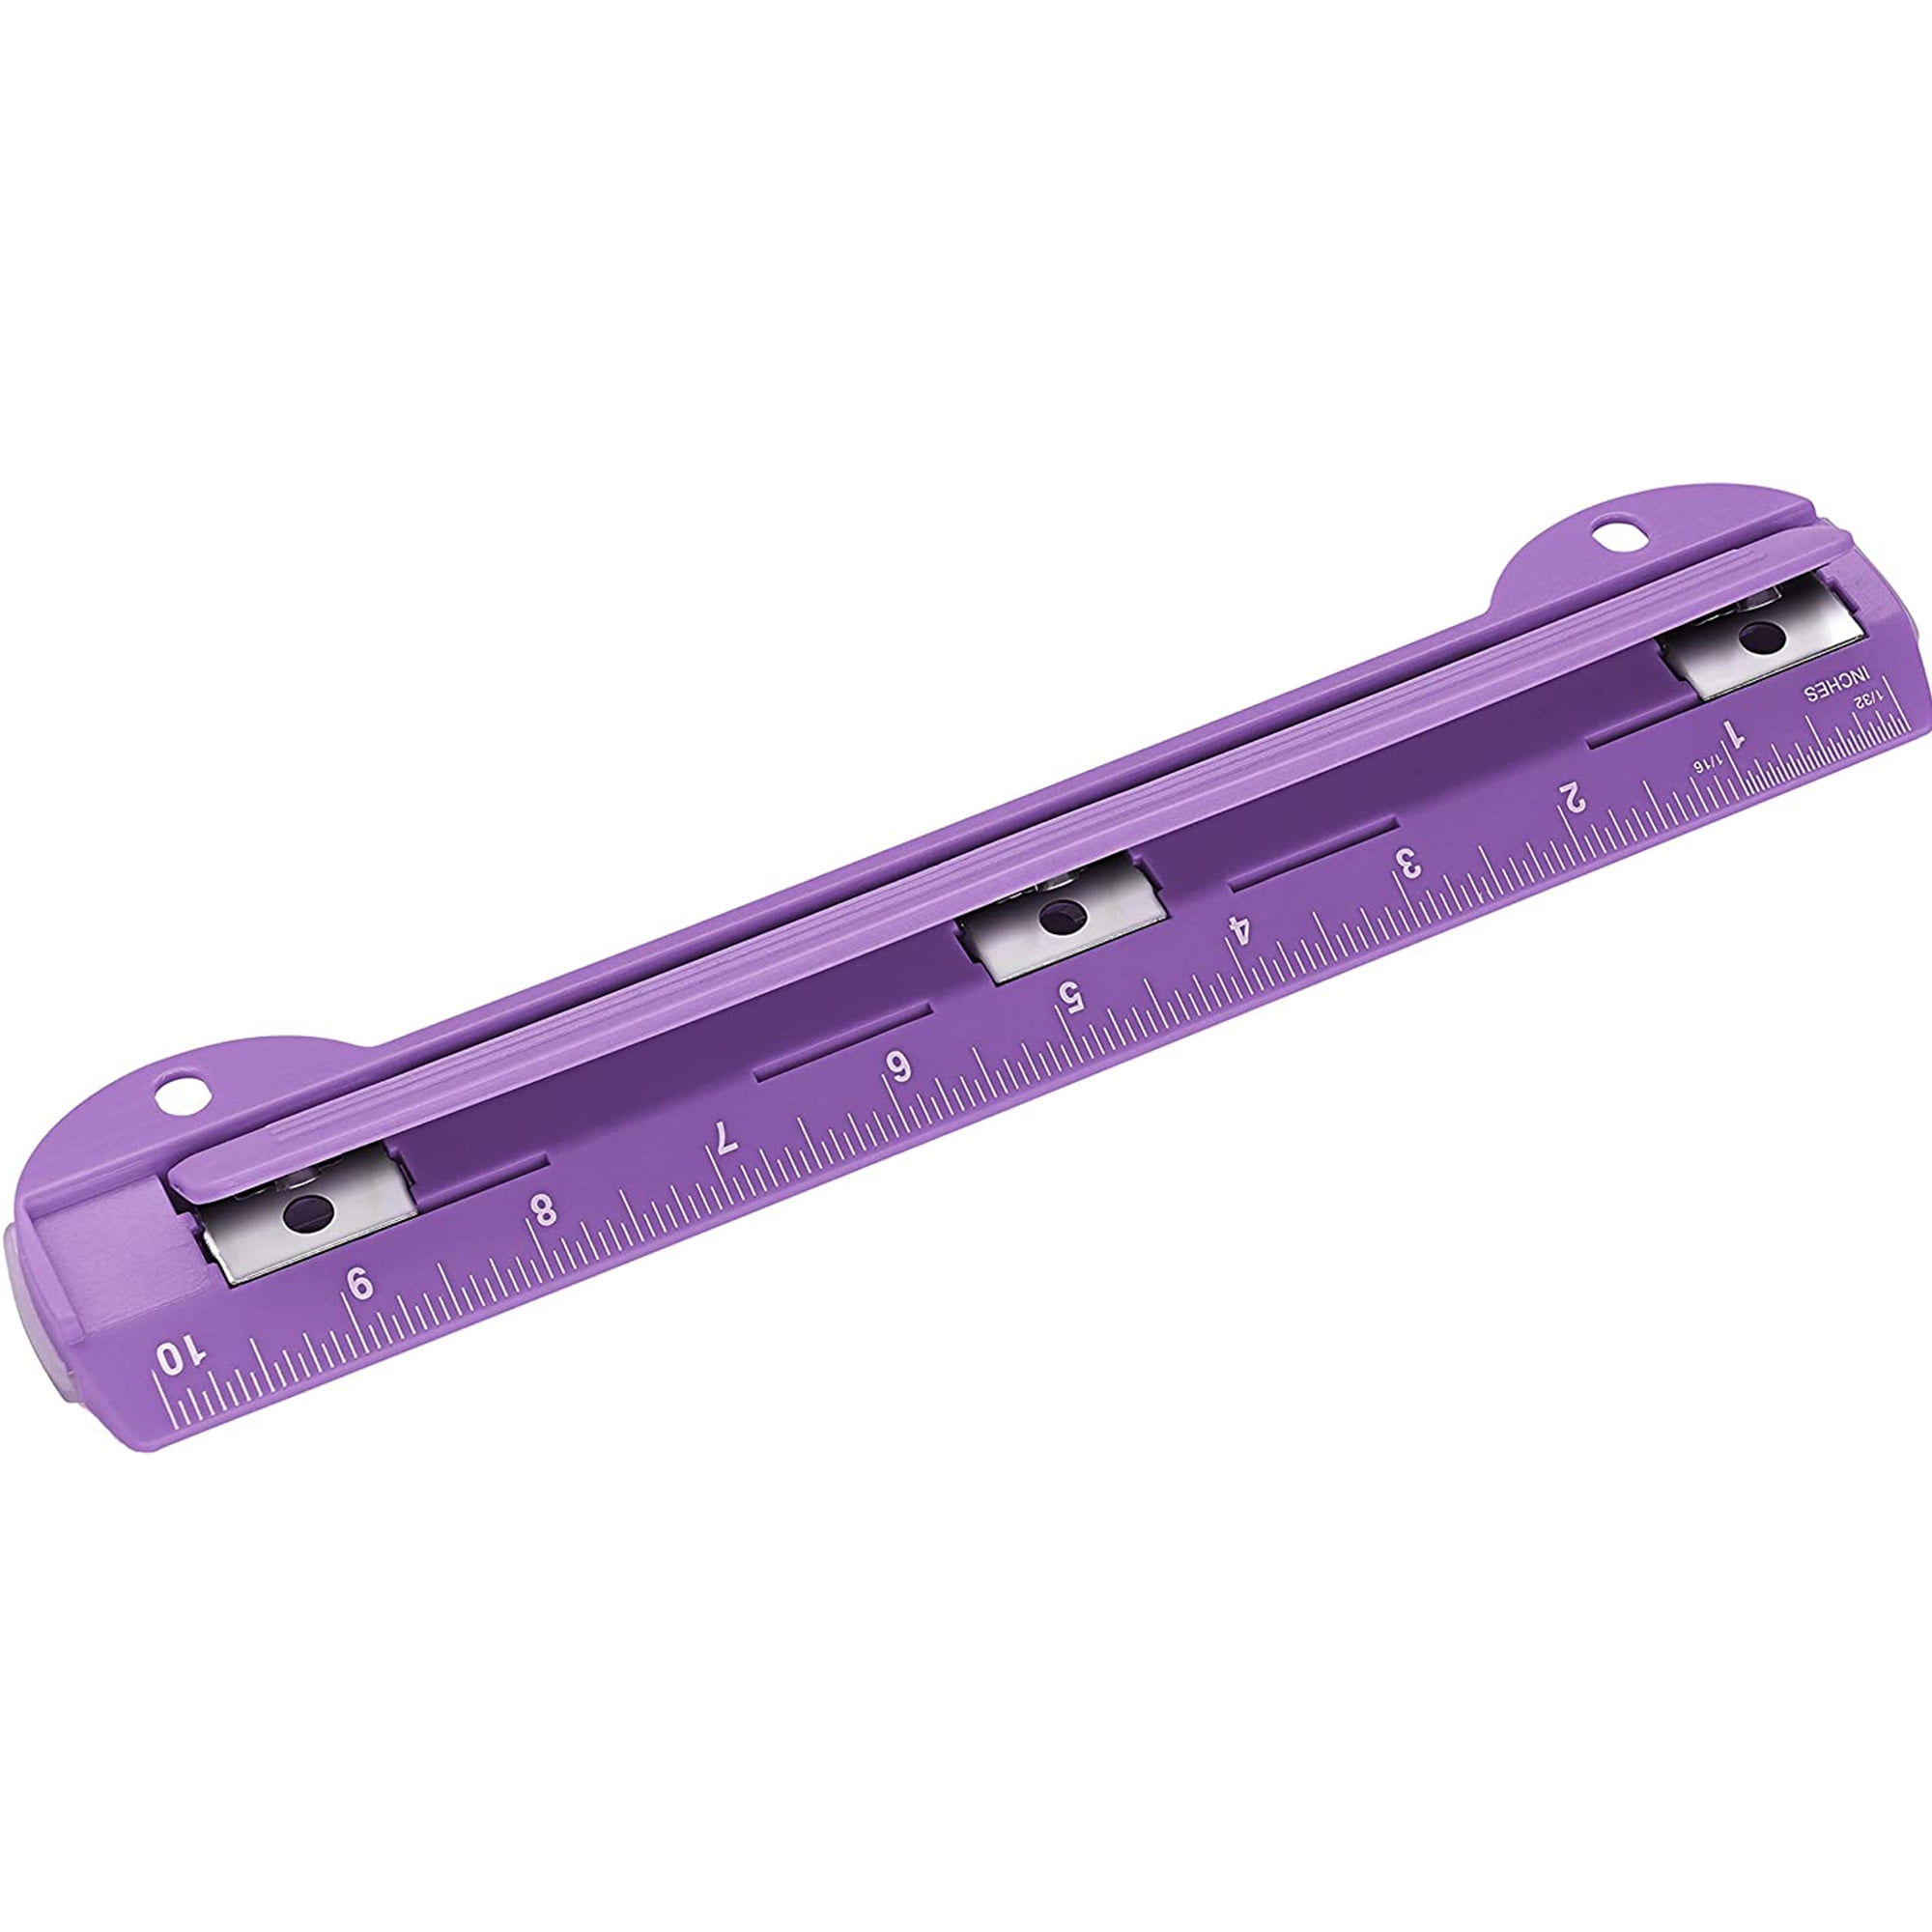 Binder 3 Hole Punch, Assorted Colors - CHL80933